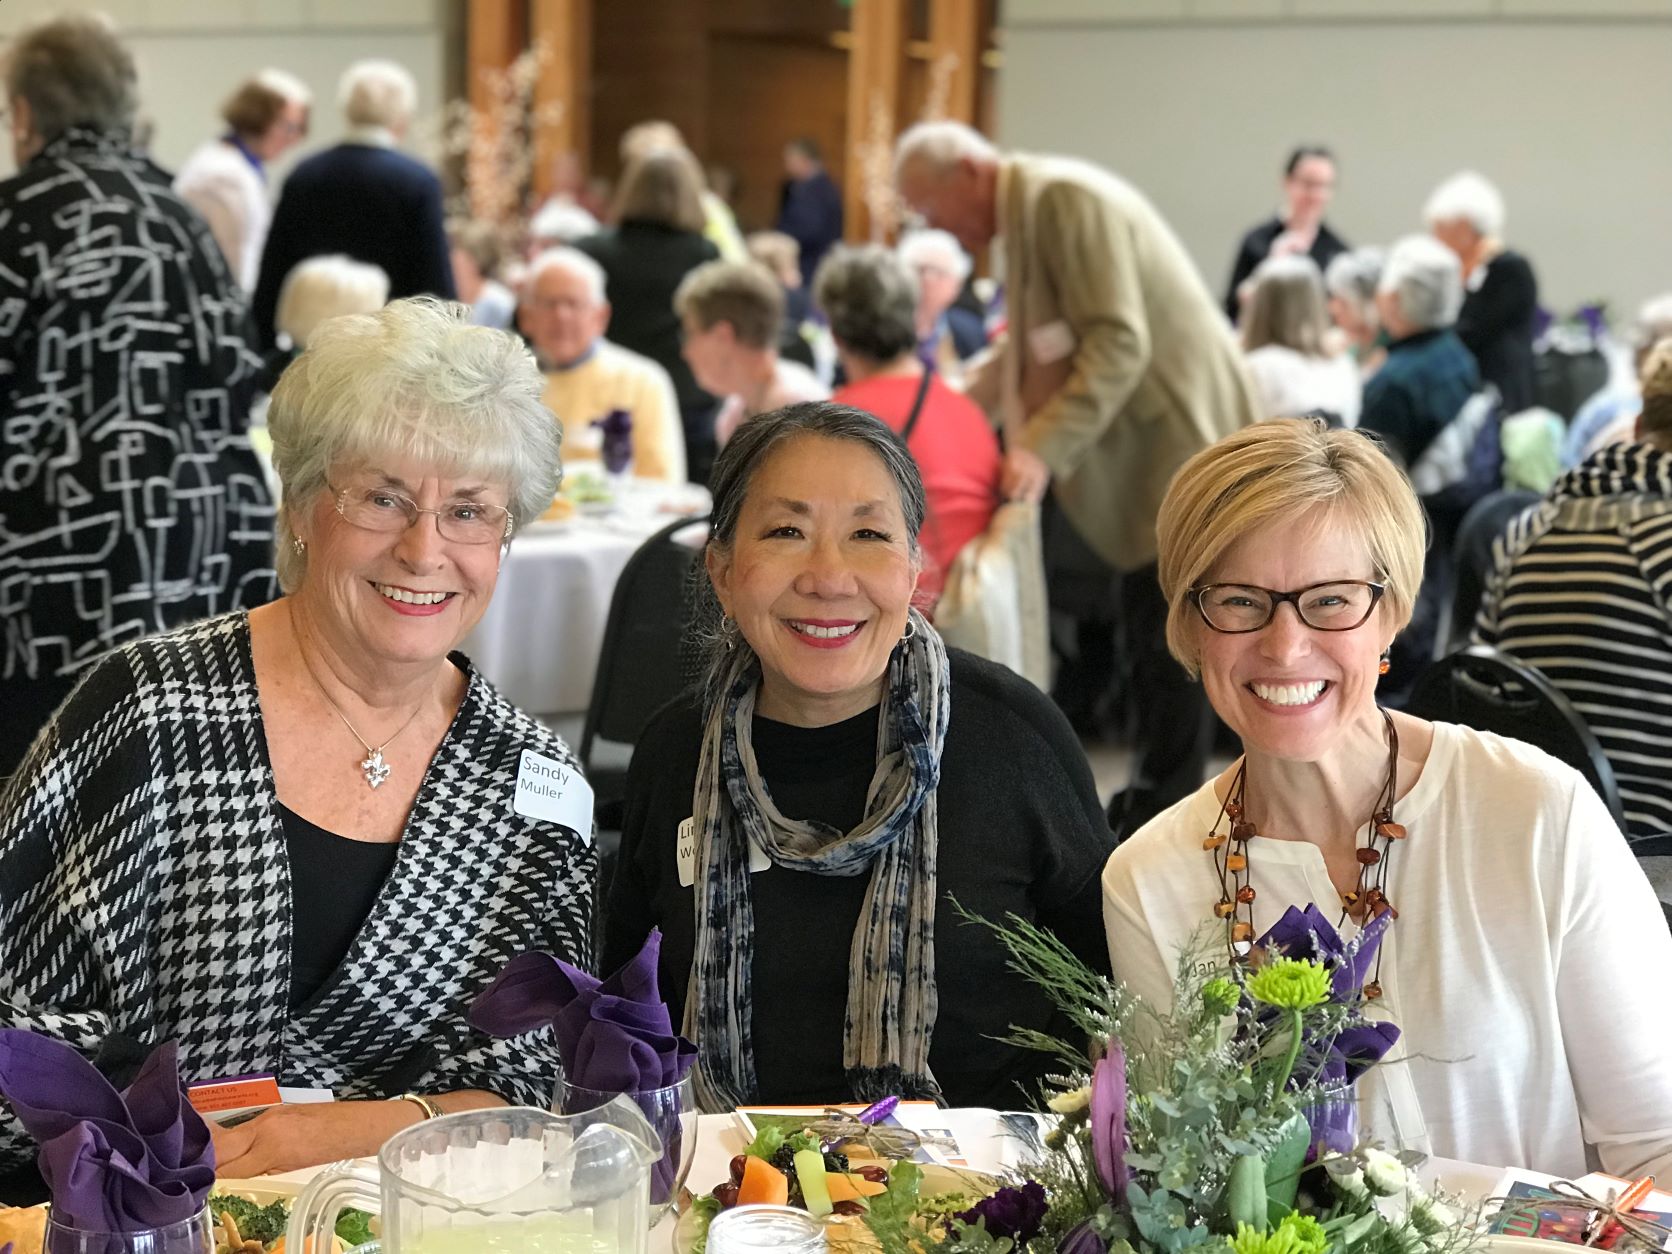 "Since 1996, I have met the most wonderful people in the world who have gathered at the WBCA to find, experience and create art. By giving to Heart 4 Art you will support our community so everyone can continue to bring the beauty and joy of art to their everyday lives." - Jan Chamberlin, pictured right